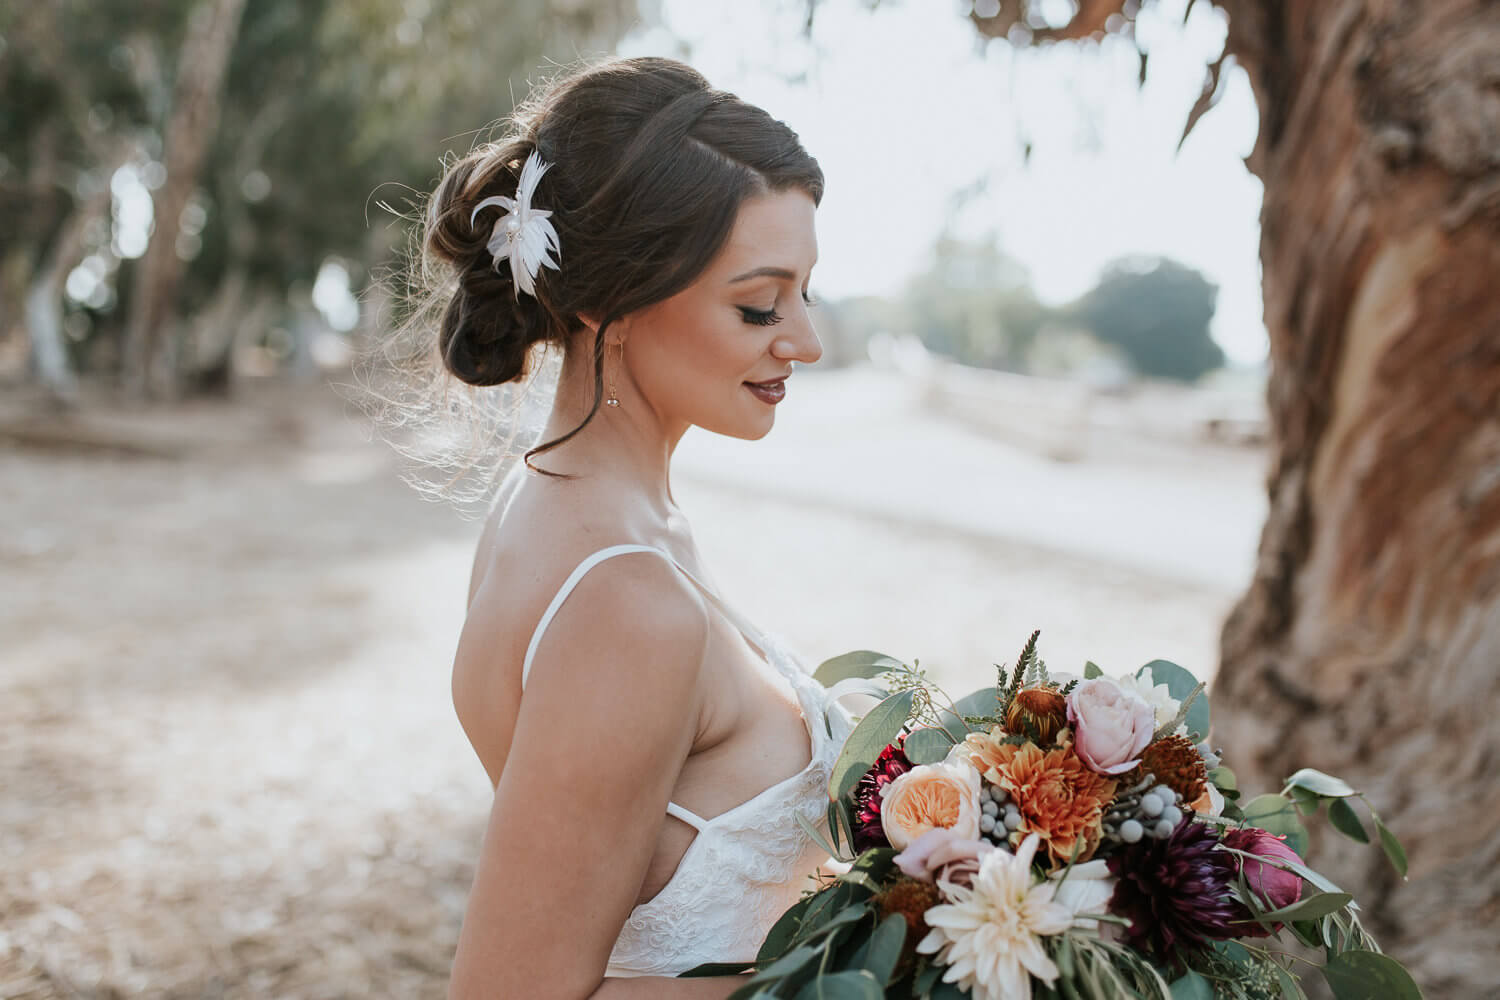 Bridal and wedding styled shoot at Ardenwood Farms in Fremont California. Vintage details, flower ideas, natural light photography.